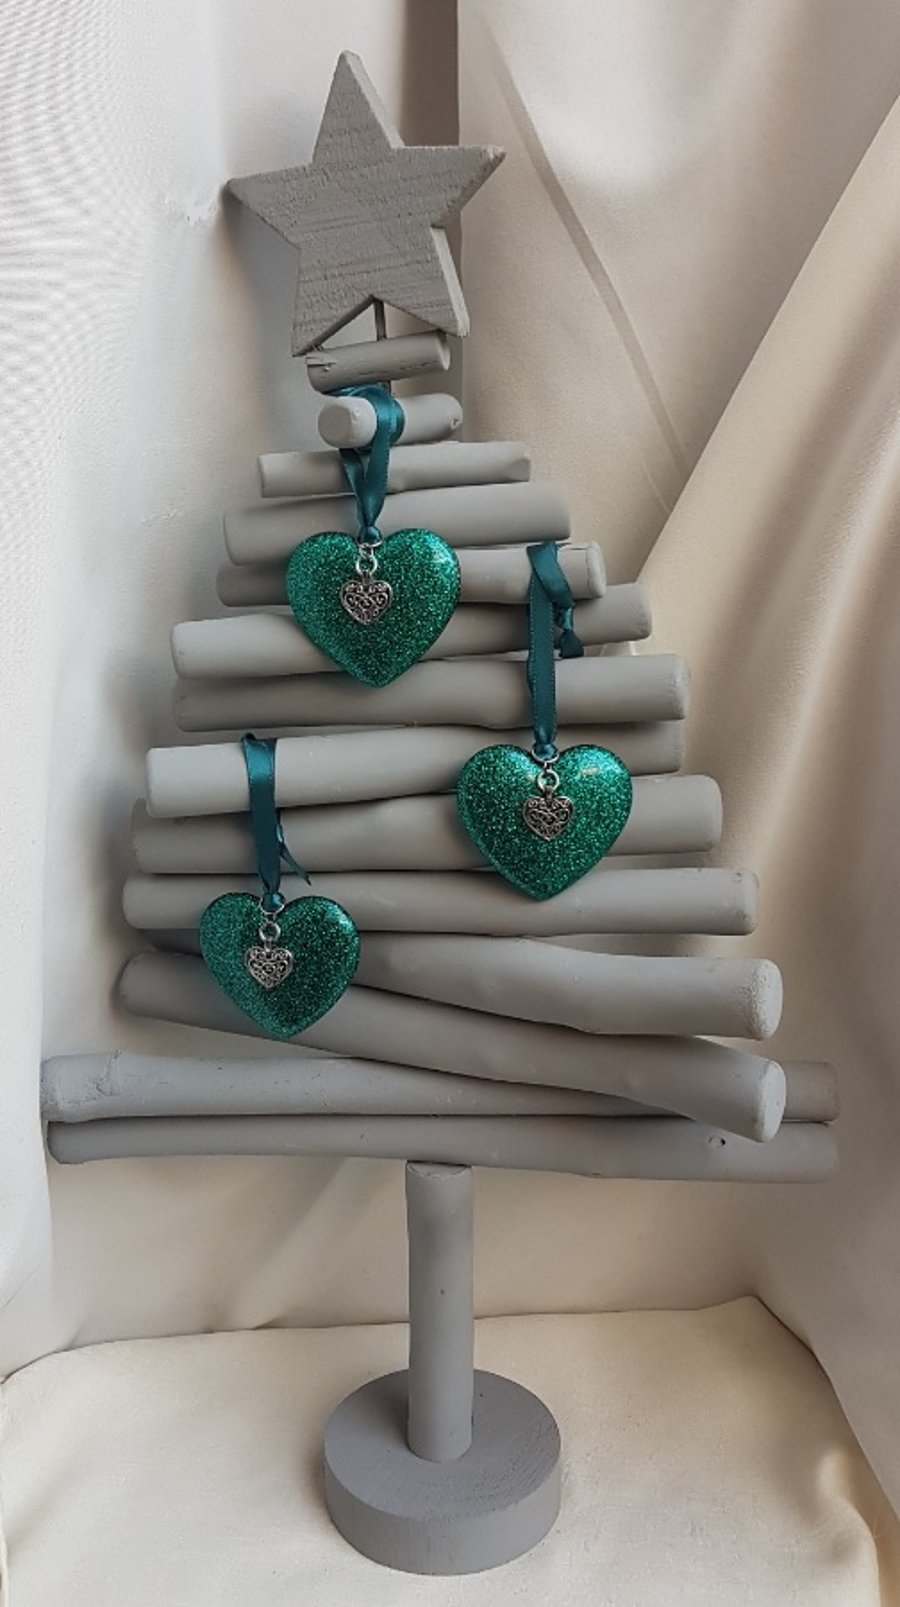 Gorgeous Glittery Teal Heart Shaped Tree Decorations - Set of 3 with Charms.